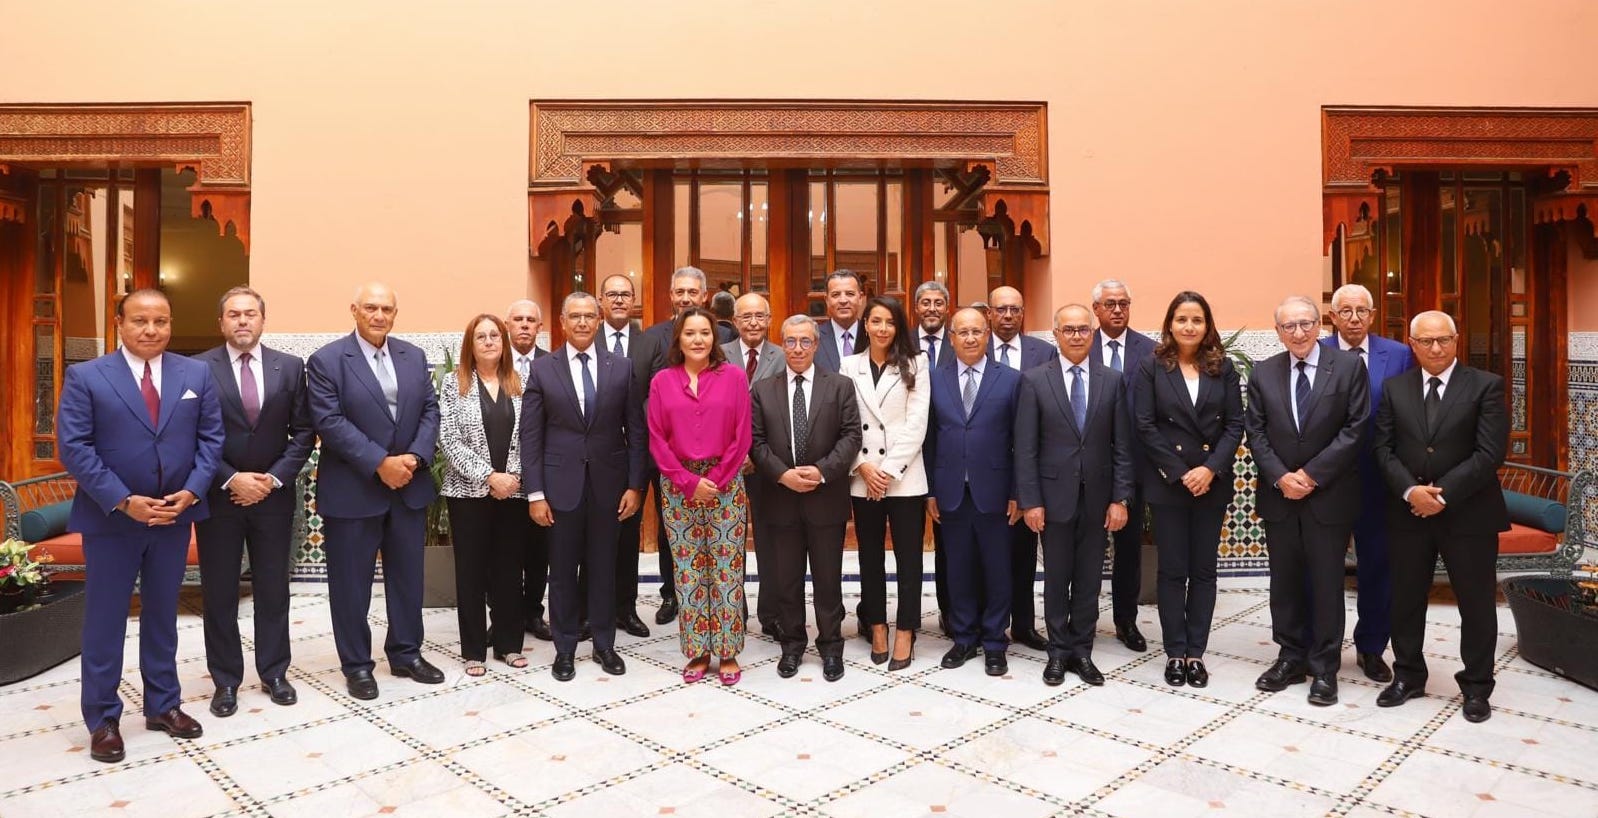 The Mohammed VI Foundation for Environmental Protection holds its Board of Directors Meeting in Marrakech